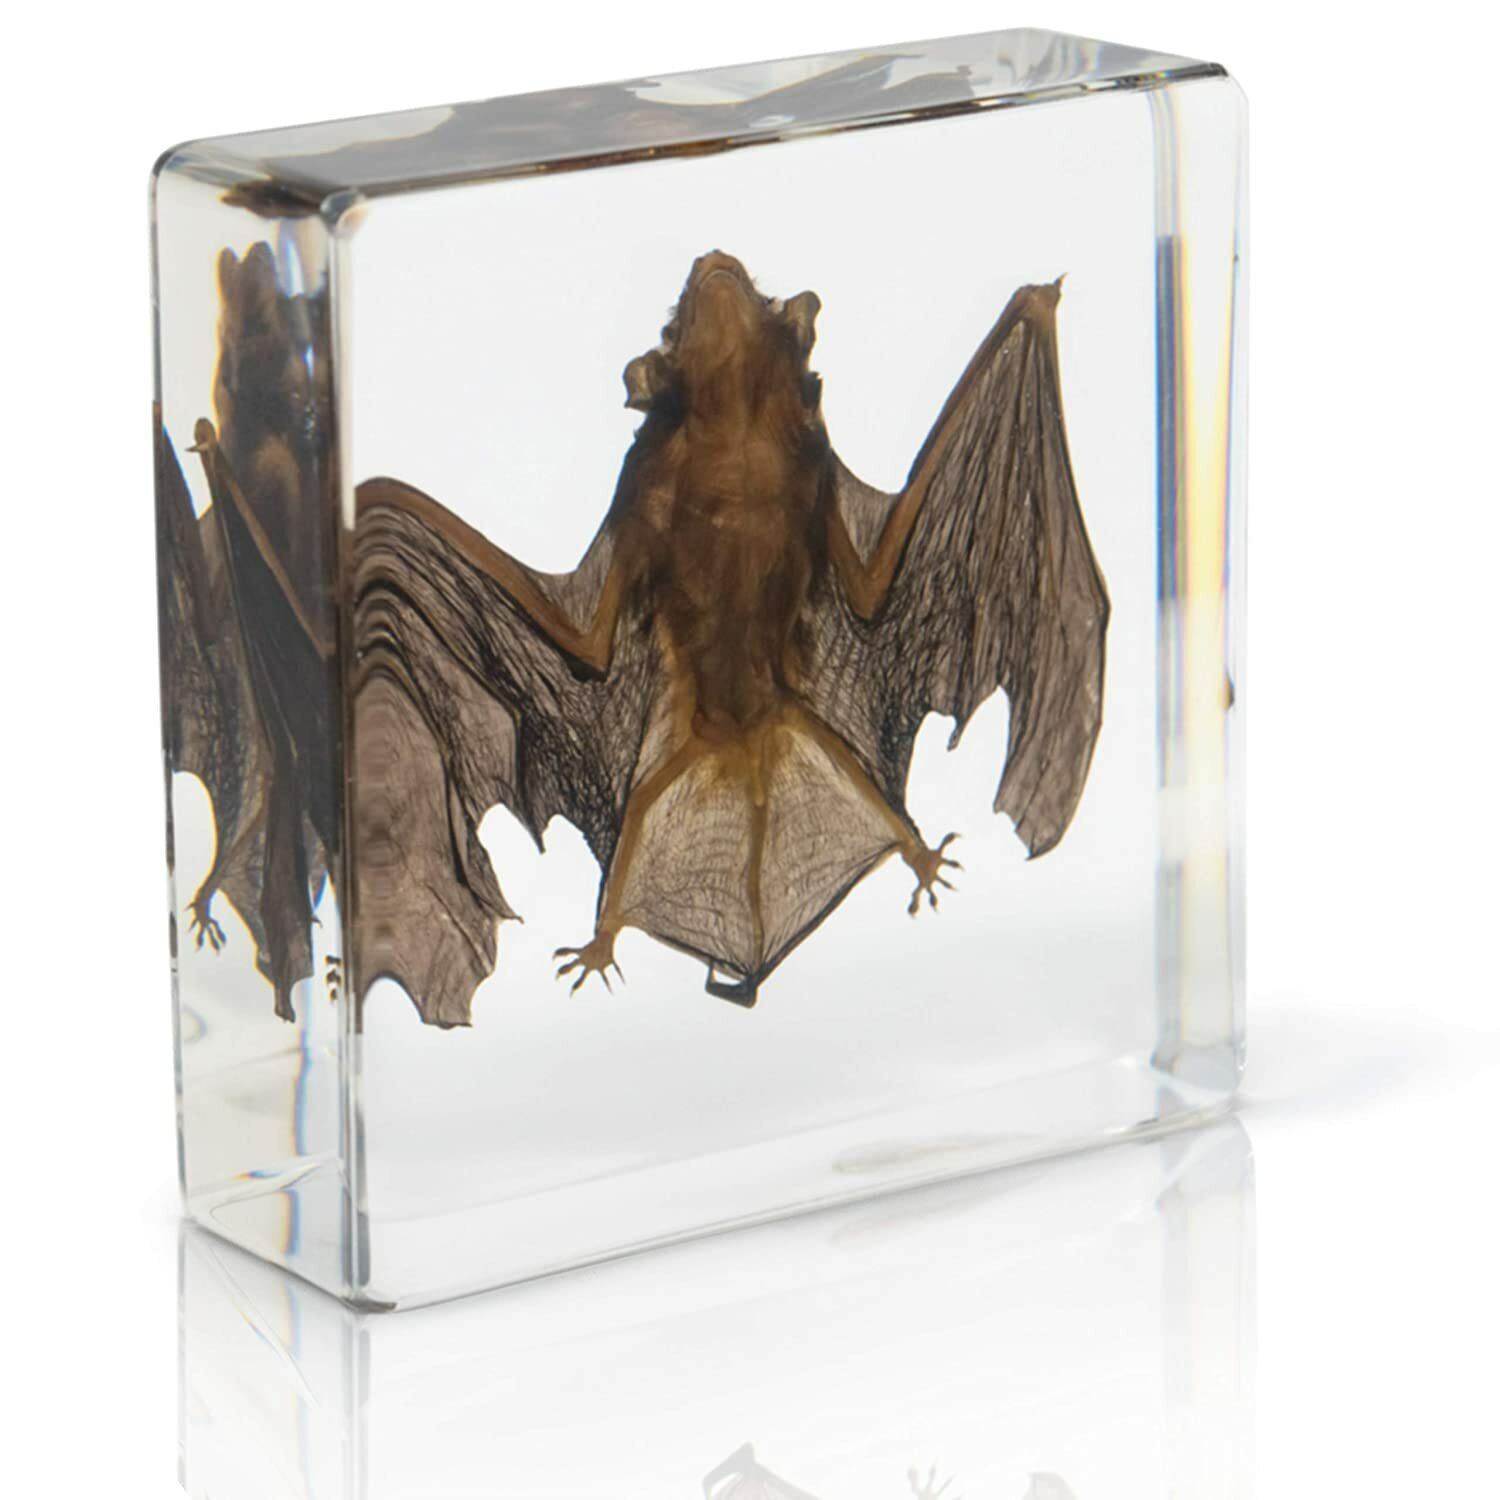 Animal Bat Specimen Science Education Taxidermy Paperweight For Scienceclassroom